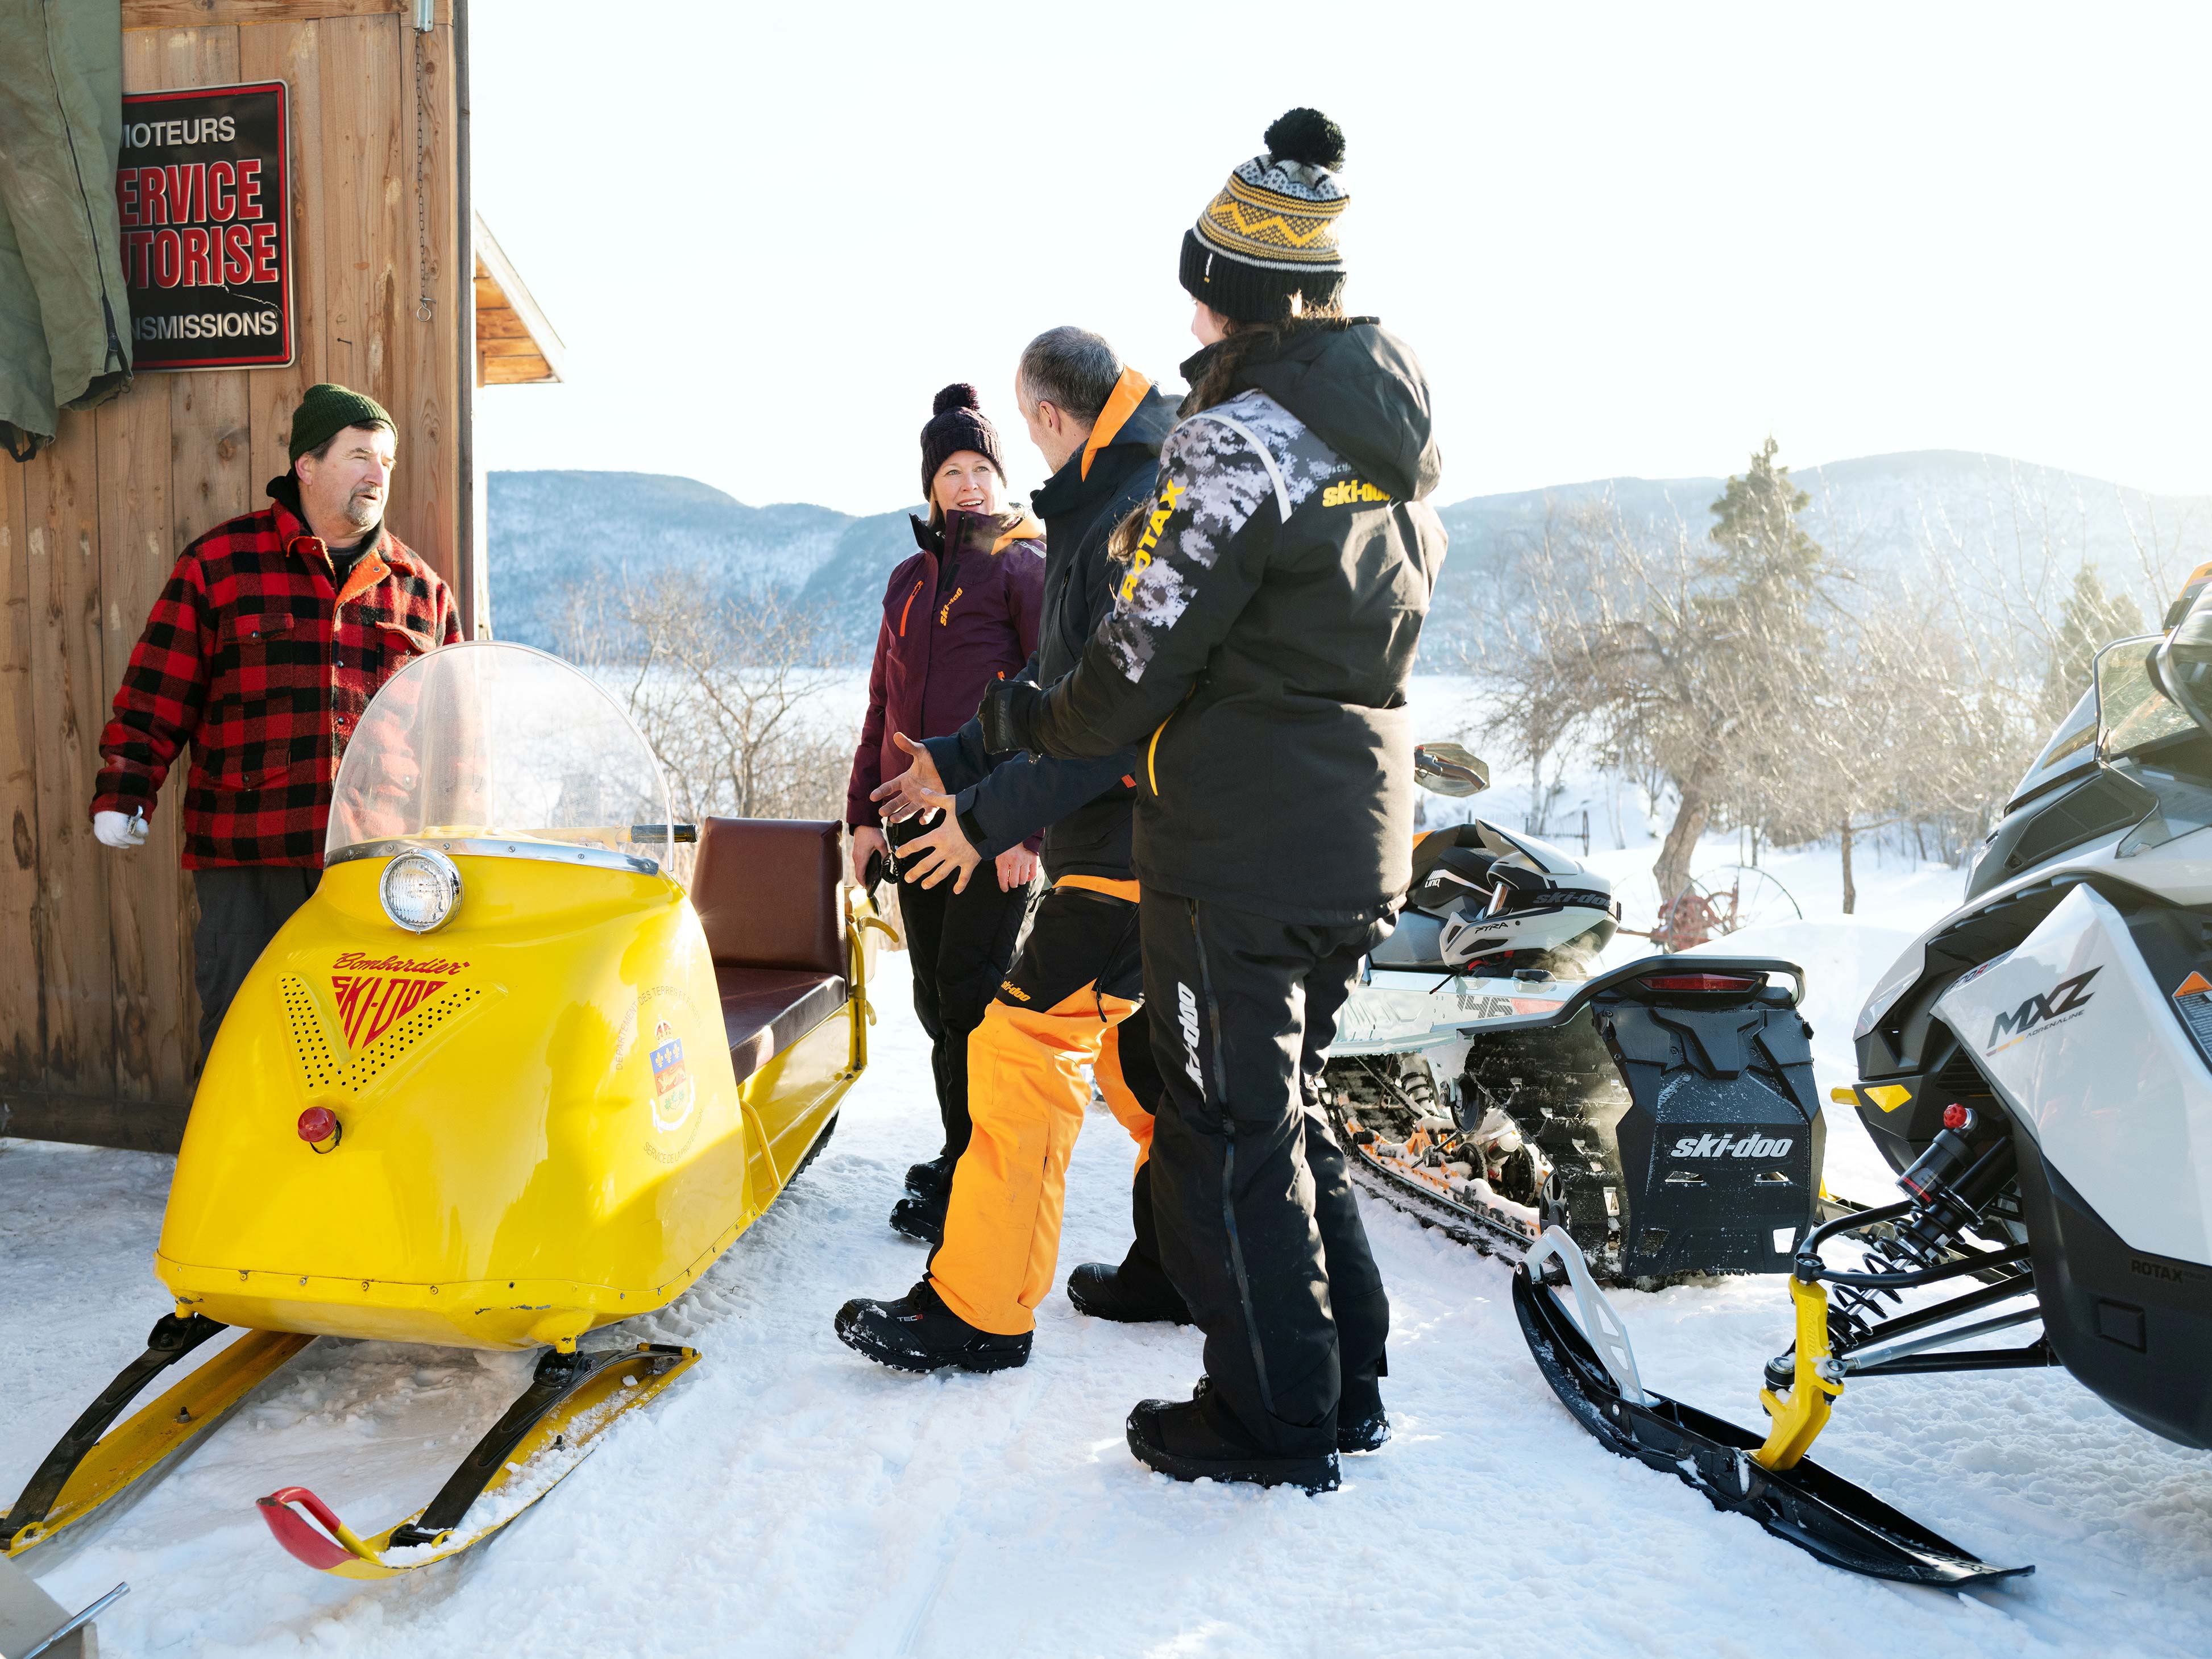 5 cool things About Ski-Doo